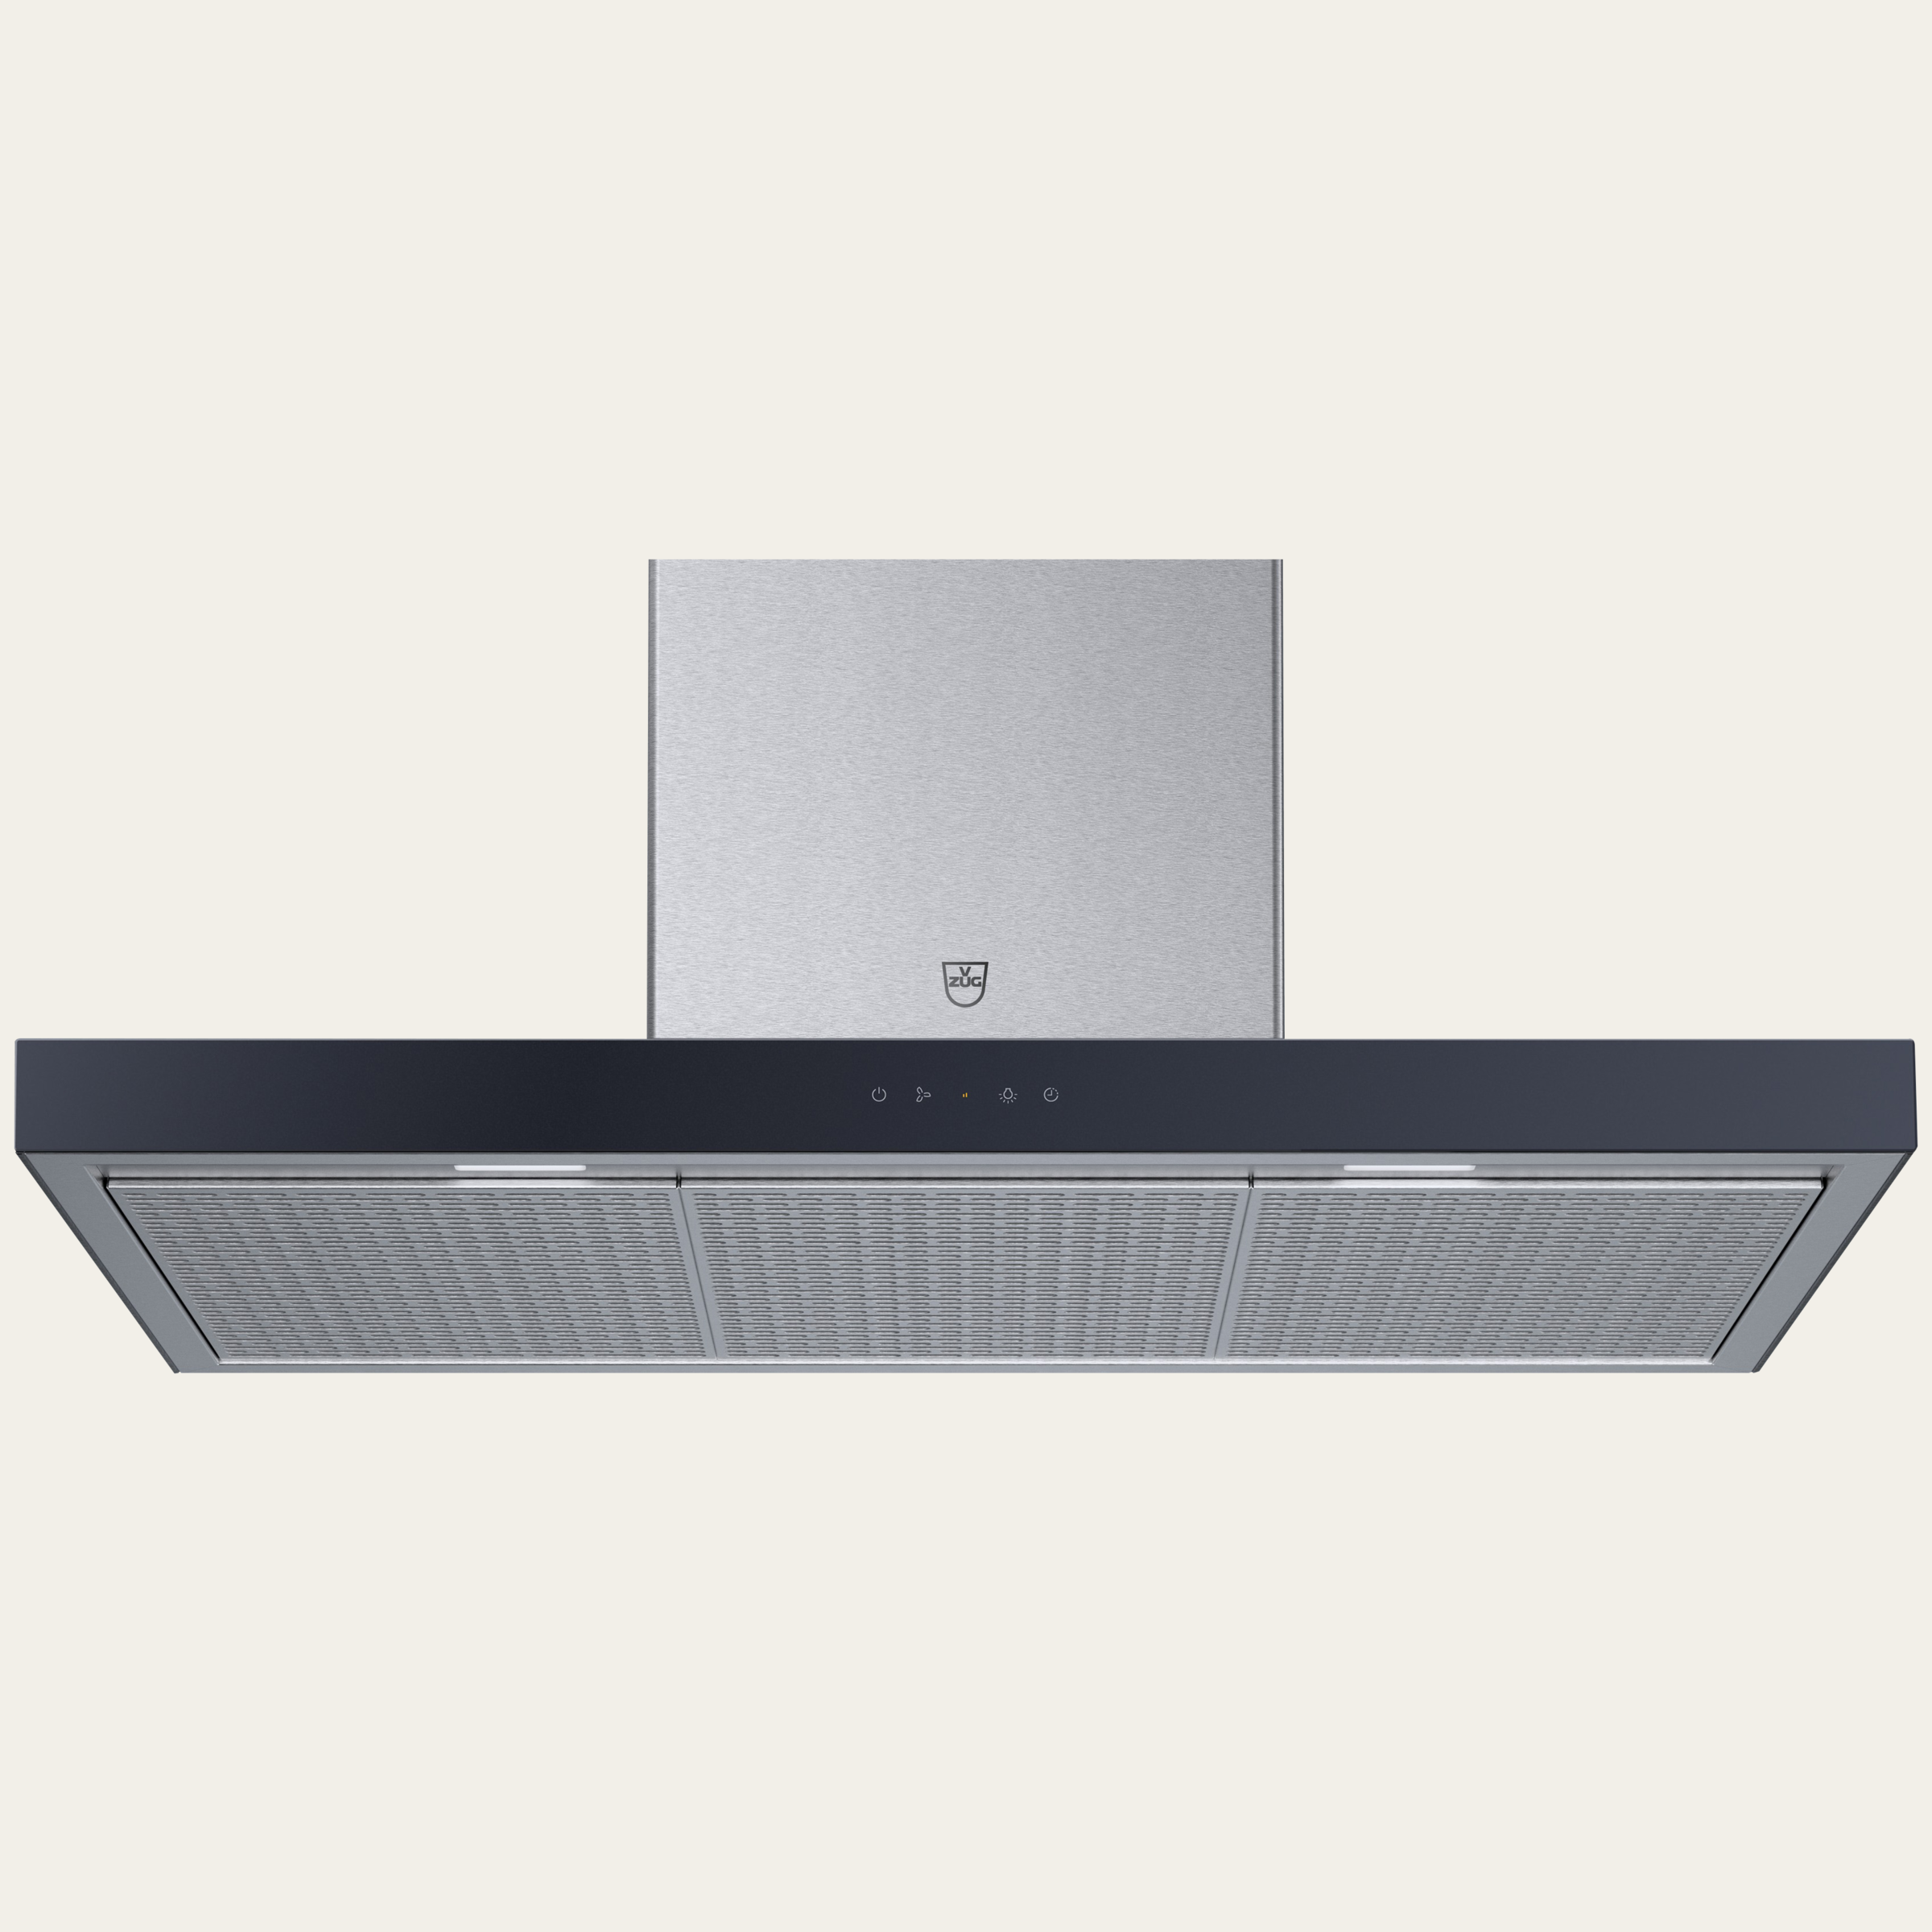 V-ZUG Range hood, AiroClearWall V6000, Standard width: 90.0 cm, Black glass, OptiLink, Energy efficiency rating: A+, Extracted air, TouchControl, Wall hood